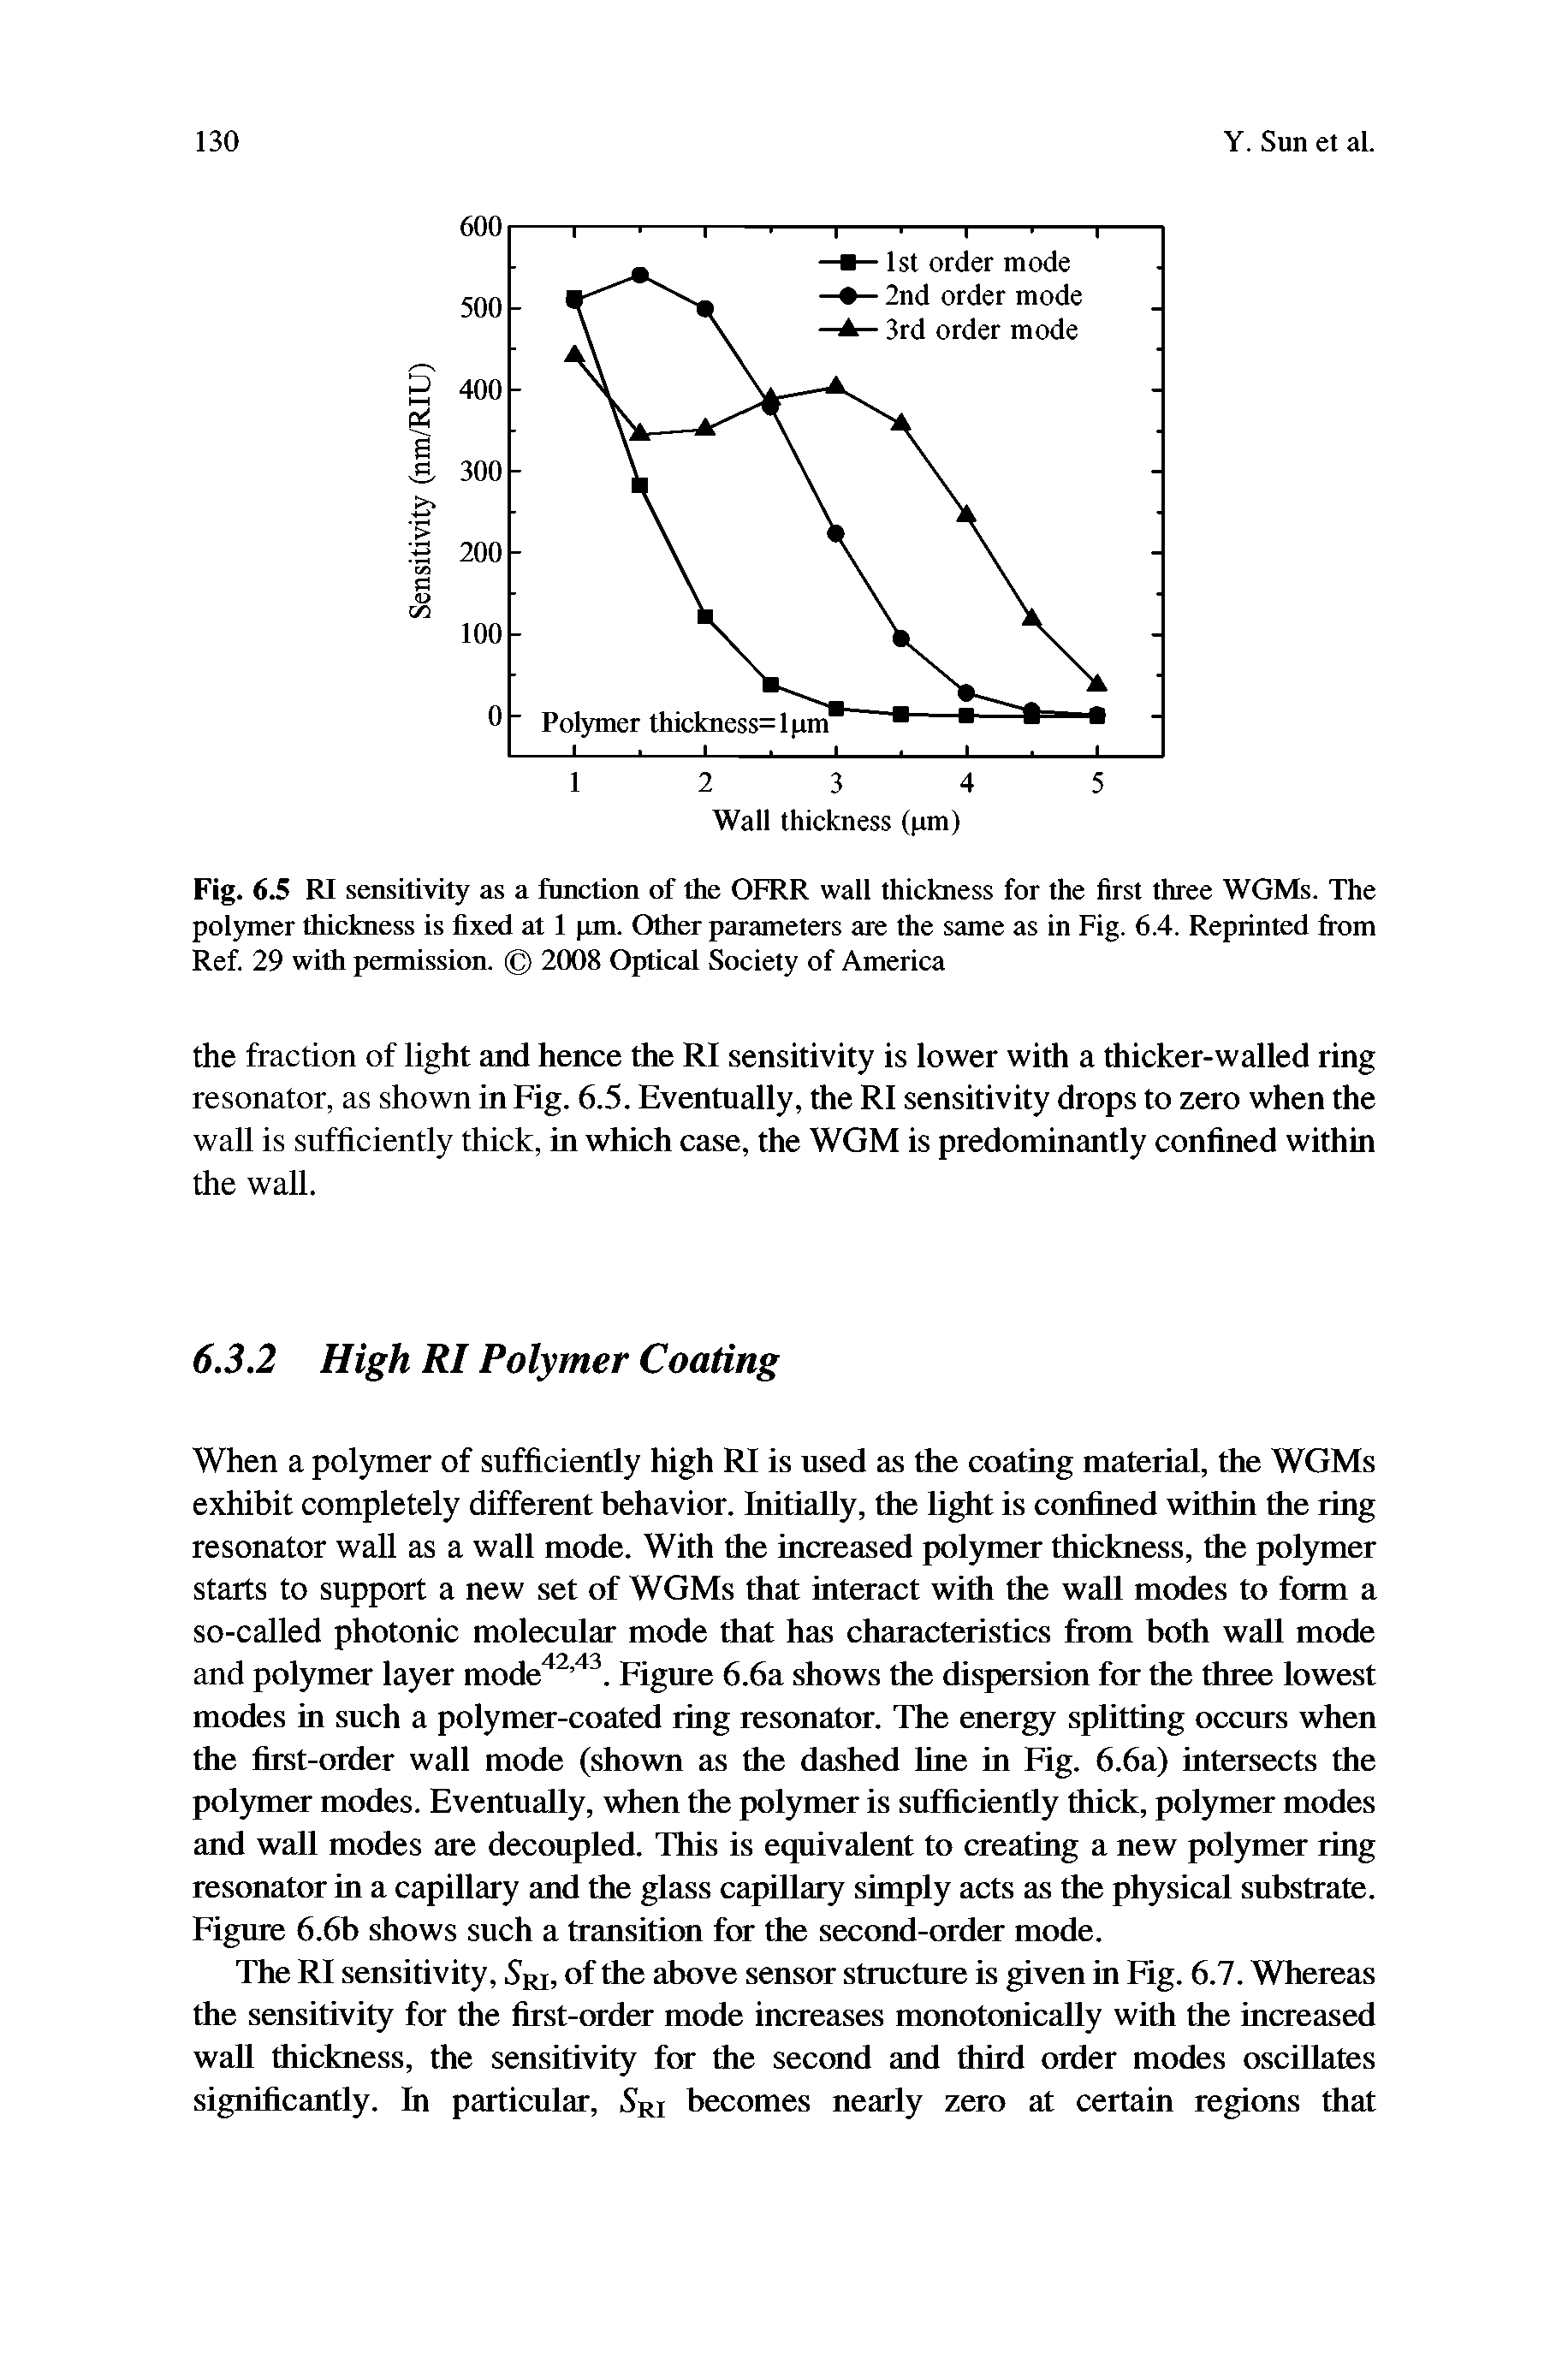 Fig. 6.5 RI sensitivity as a function of the OFRR wall thickness for the first three WGMs. The polymer thickness is fixed at 1 pm. Other parameters are the same as in Fig. 6.4. Reprinted from Ref. 29 with permission. 2008 Optical Society of America...